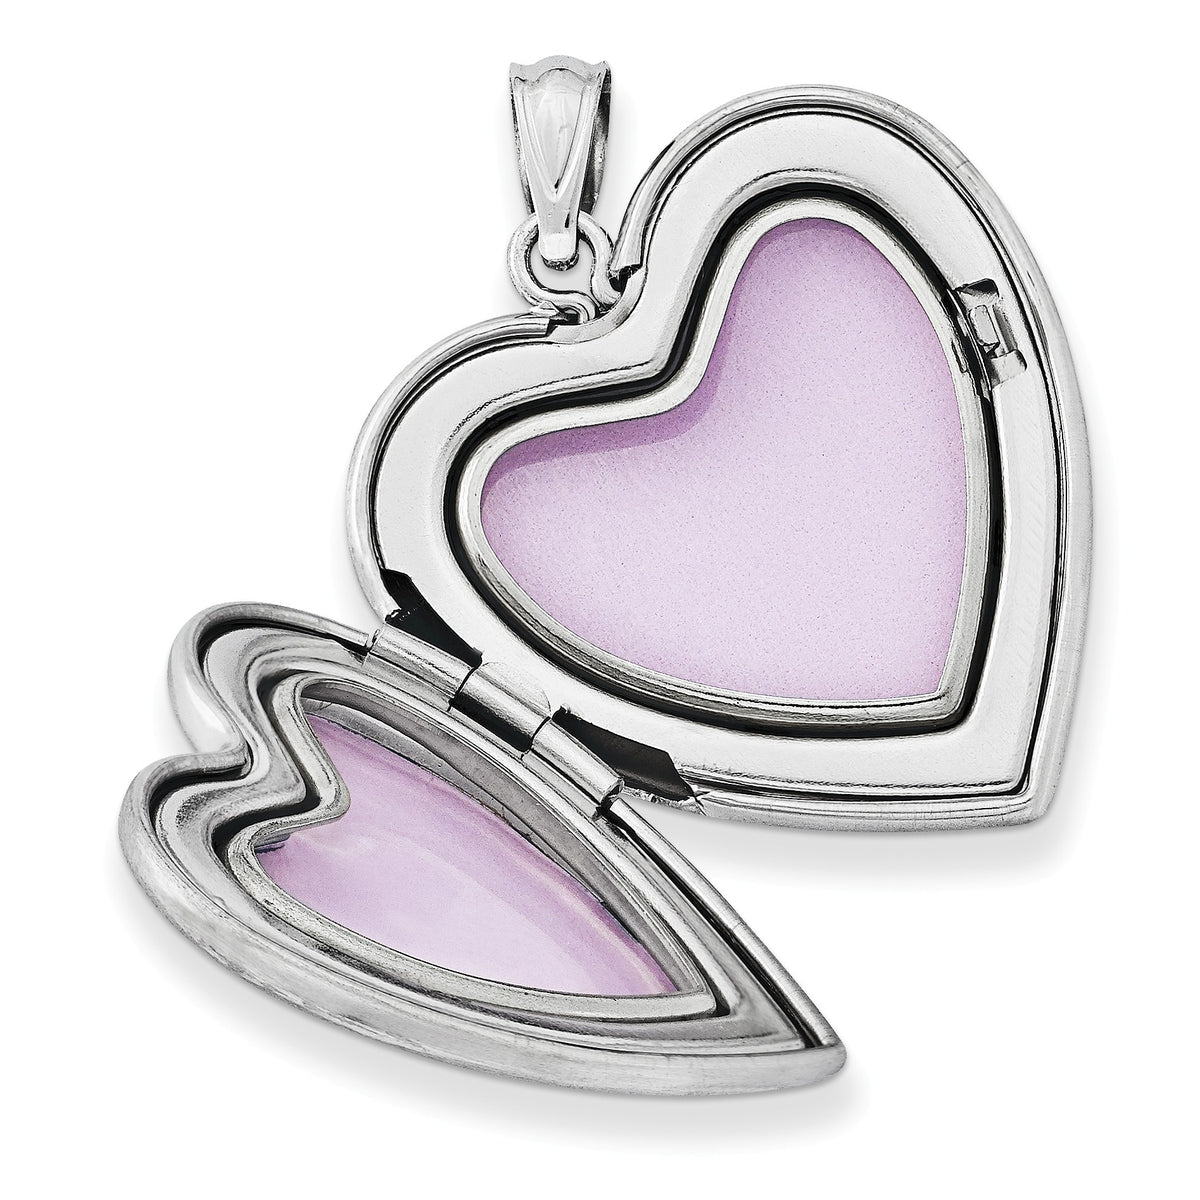 Alternate view of the Sterling Silver 24mm Breast Cancer Awareness Heart Locket by The Black Bow Jewelry Co.